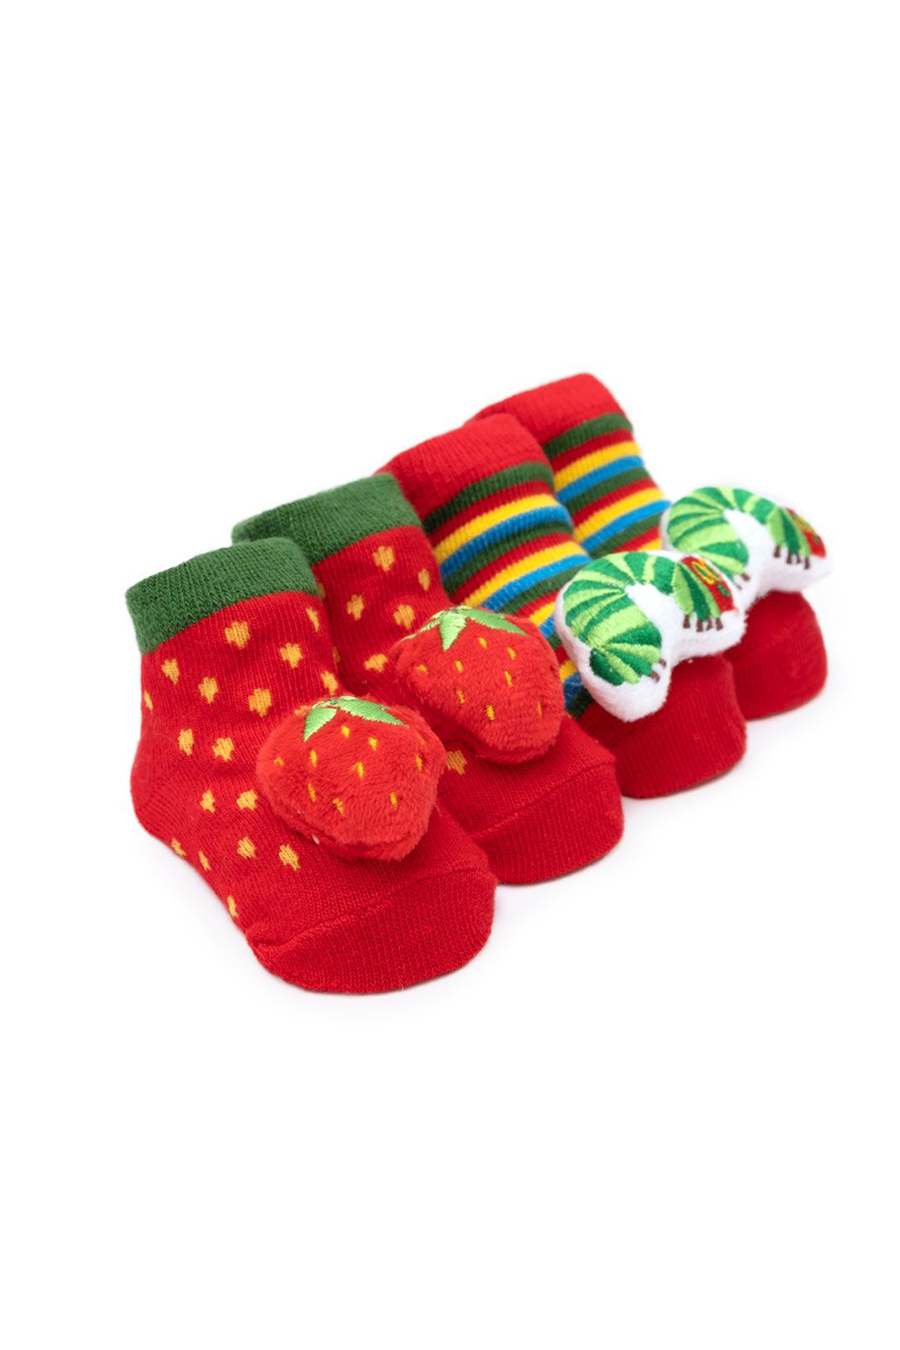 Hungry Caterpillar Booties | Multi 0 -12 Months - Main Image Number 1 of 1